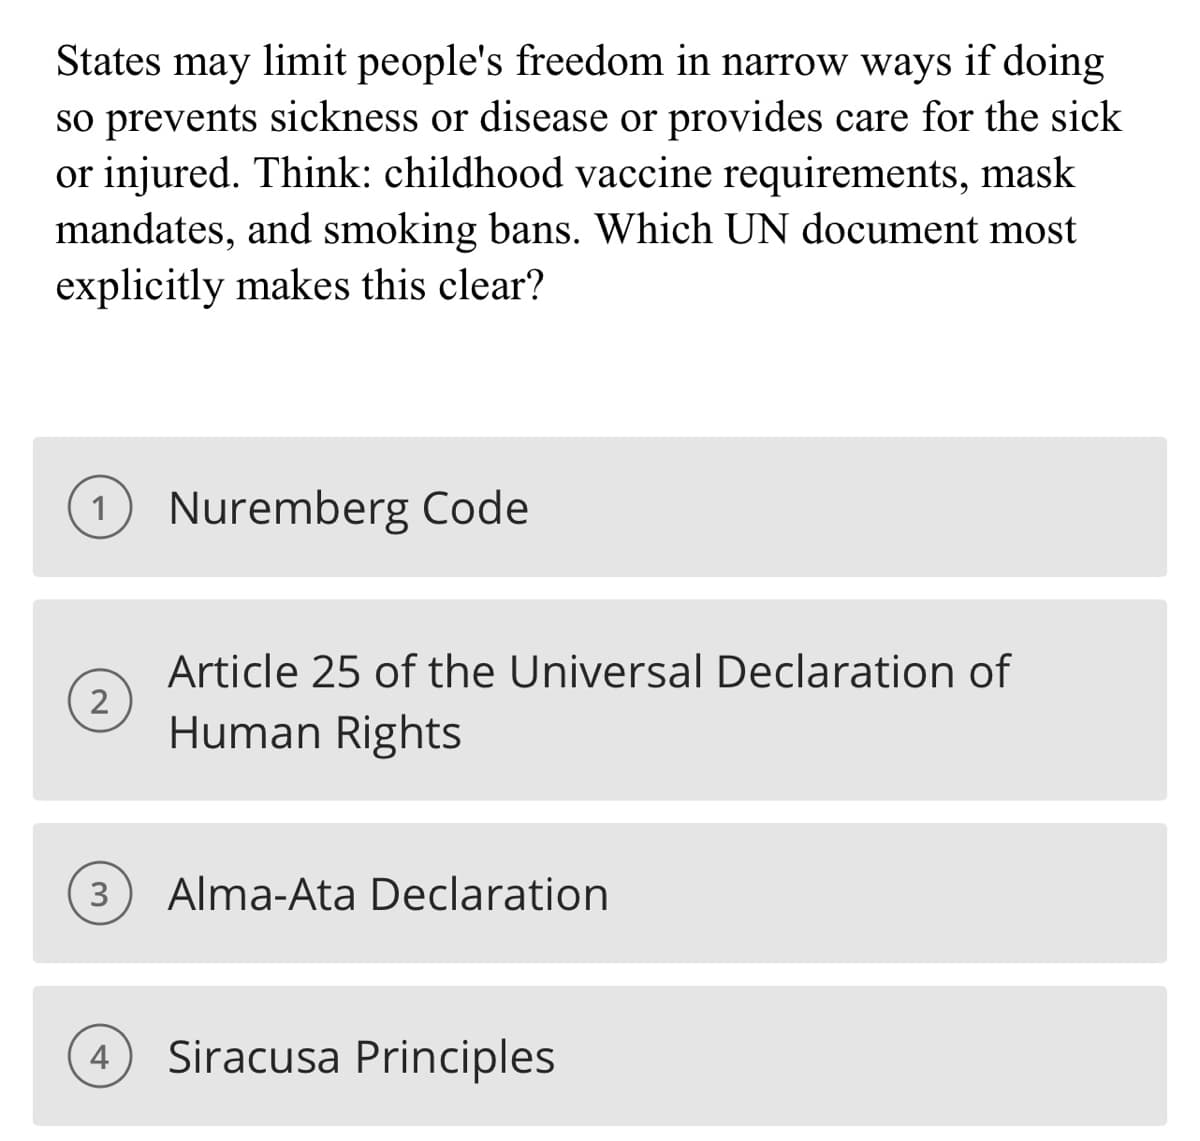 States may limit people's freedom in narrow ways if doing
so prevents sickness or disease or provides care for the sick
or injured. Think: childhood vaccine requirements, mask
mandates, and smoking bans. Which UN document most
explicitly makes this clear?
1
2
3
4
Nuremberg Code
Article 25 of the Universal Declaration of
Human Rights
Alma-Ata Declaration
Siracusa Principles